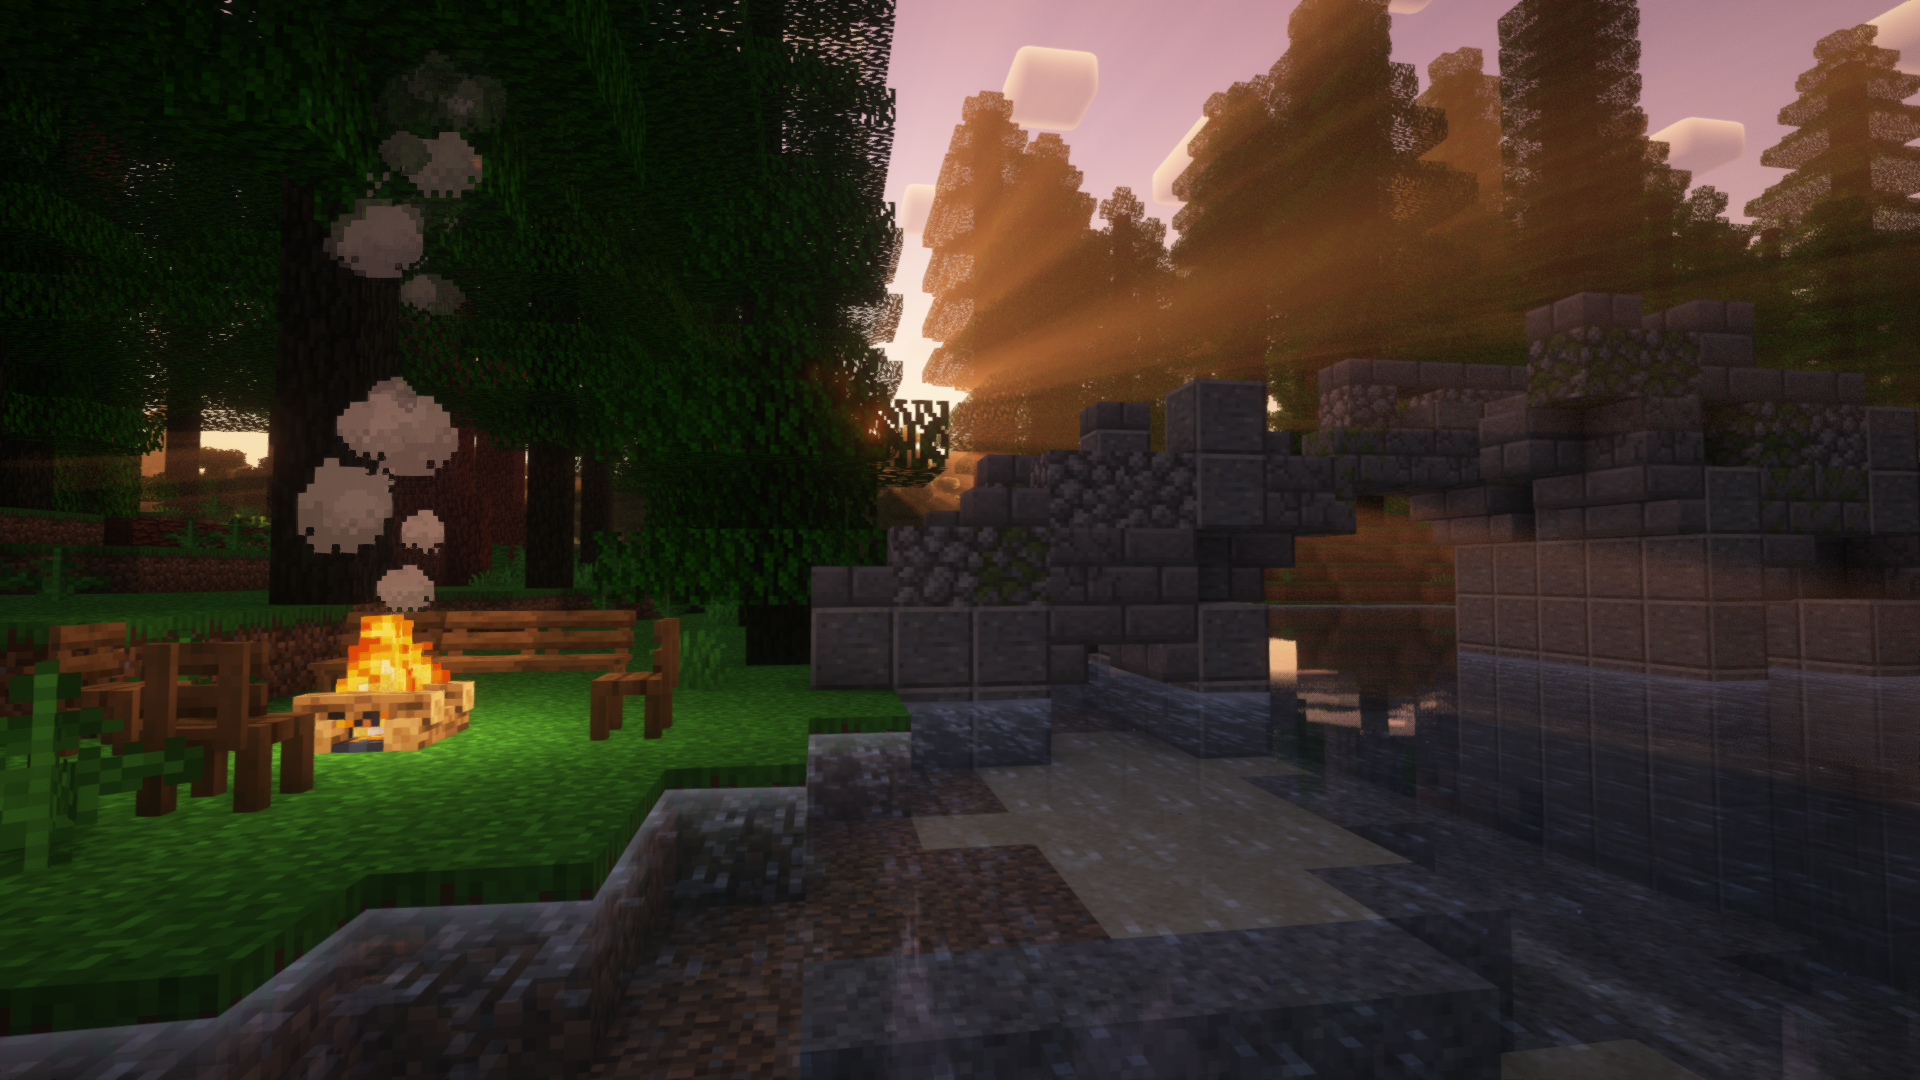 A nice little campfire with some chairs and a bench next to a procedurally generated old bridge